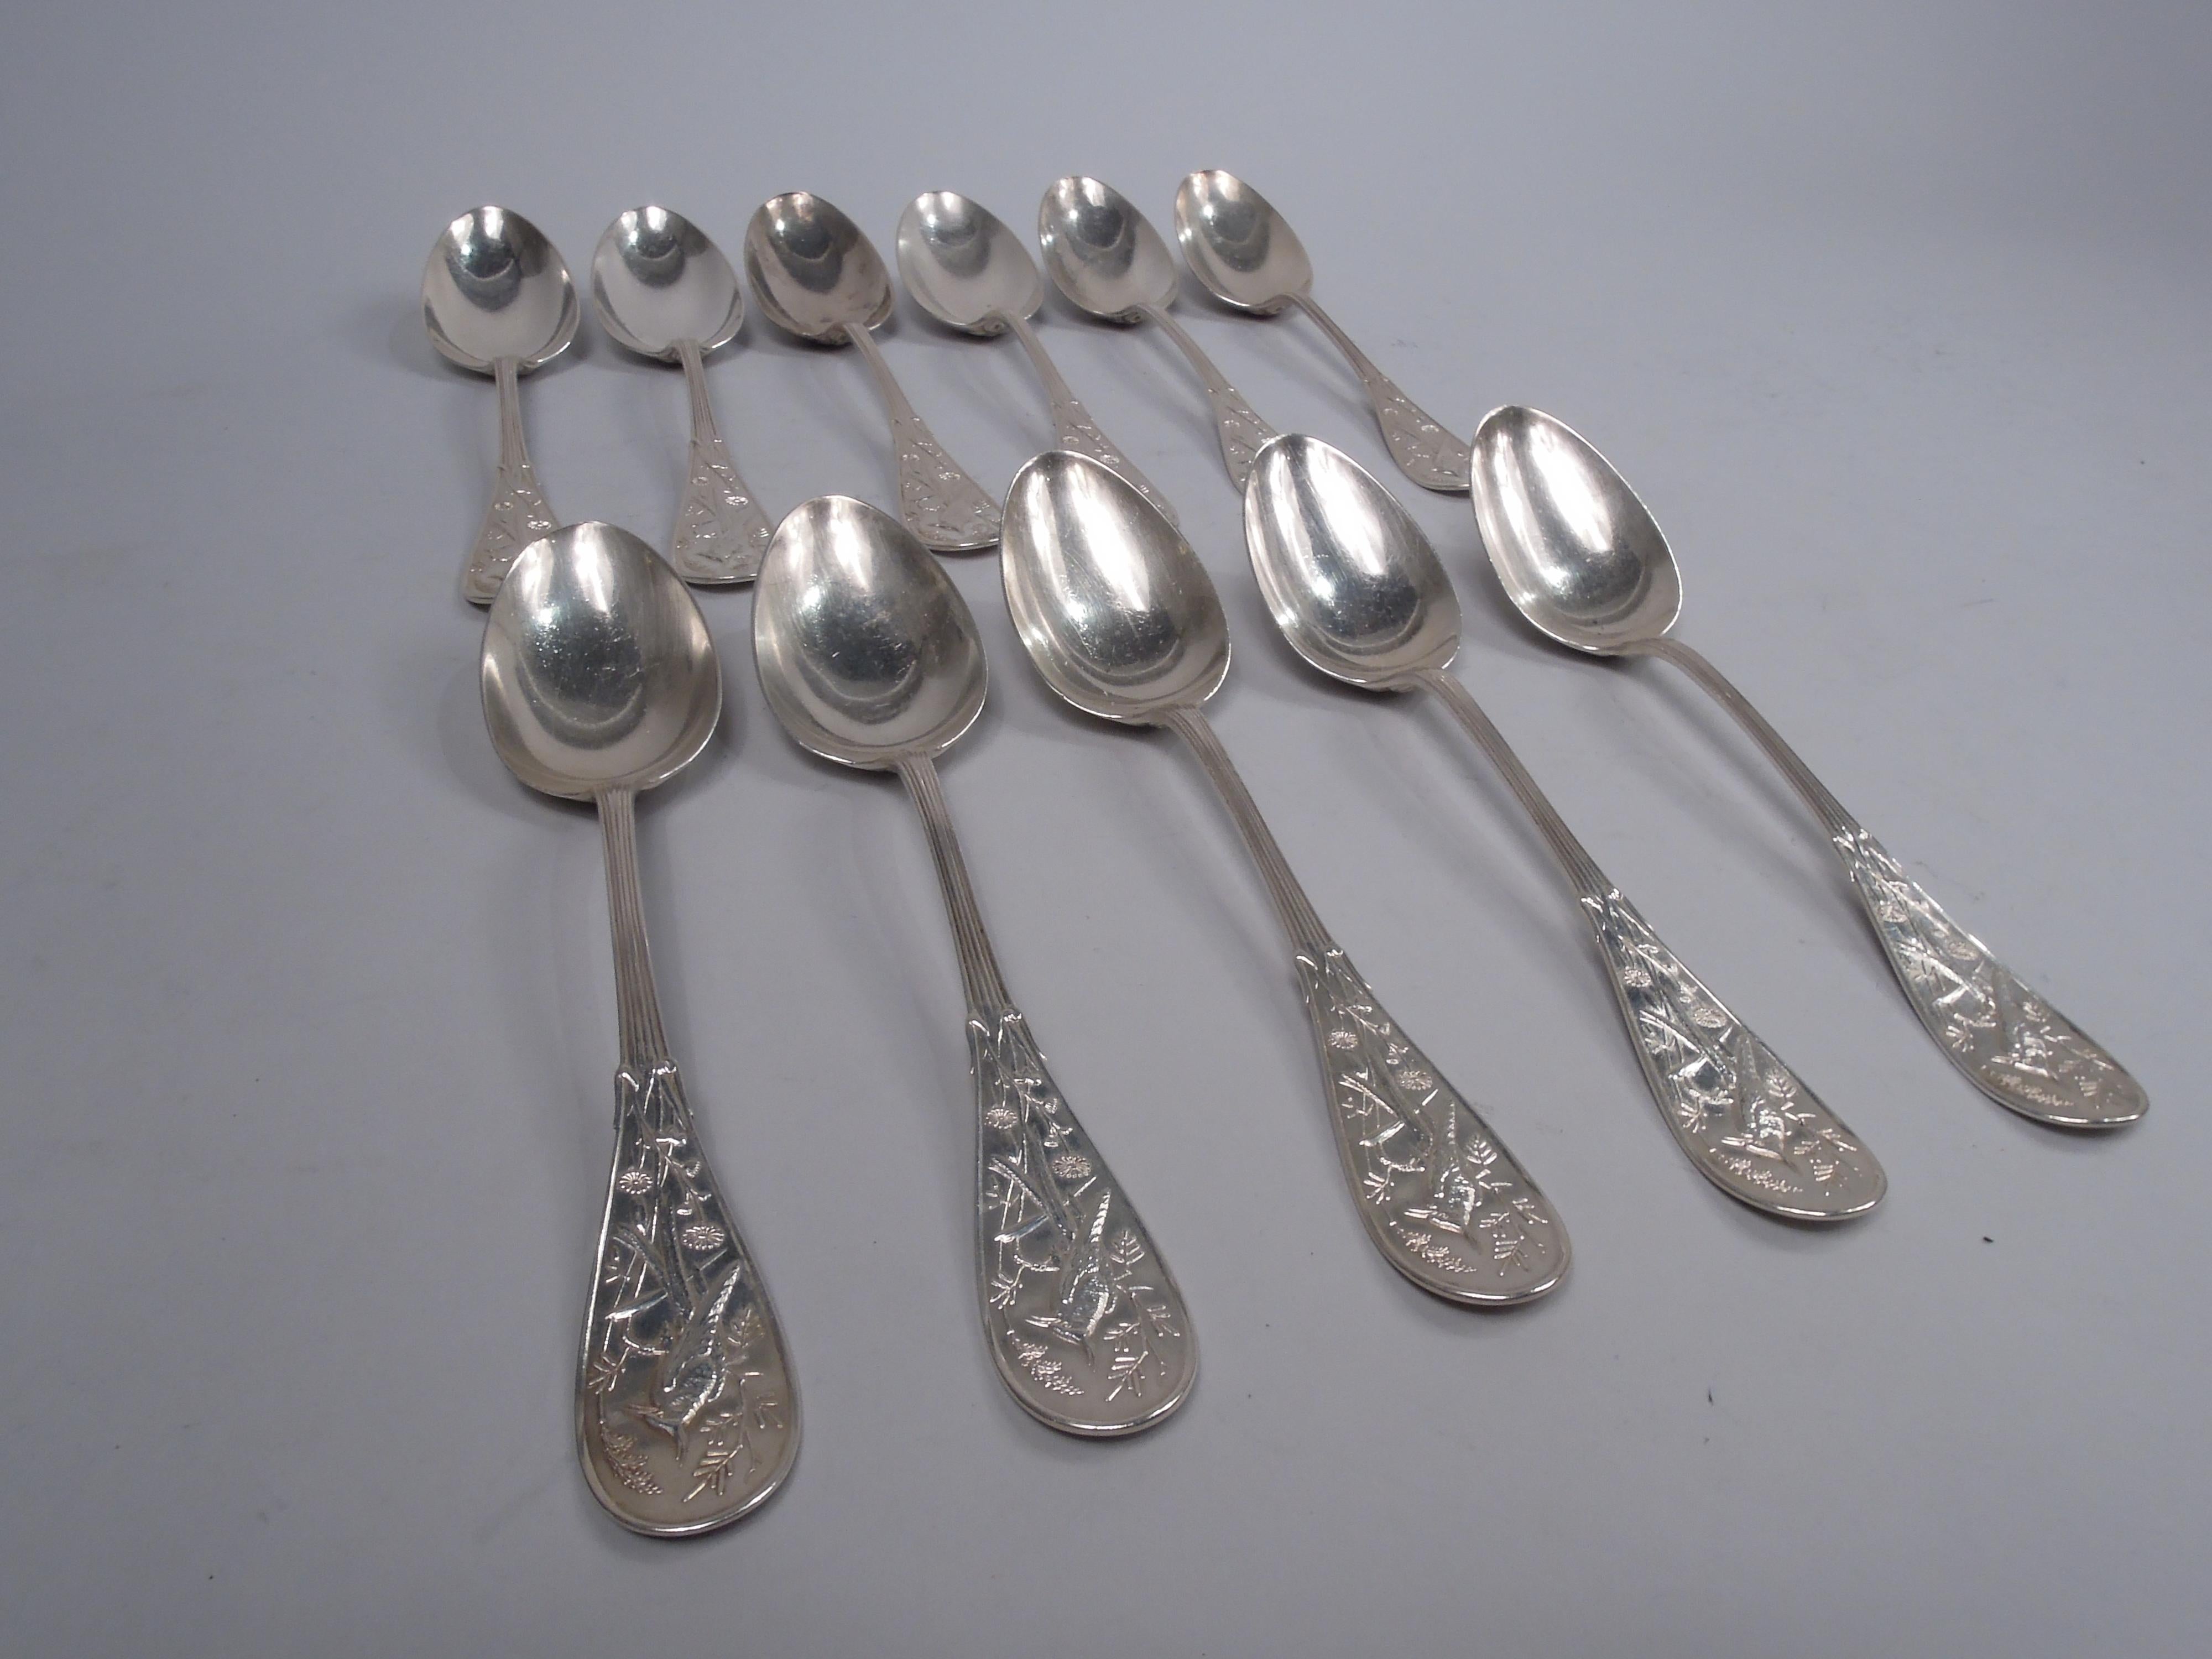 Set of 11 Japanese sterling silver tablespoons. Made by Tiffany & Co. in New York, ca 1875. Reeded handle and oval terminal; double-sided low-relief stylized ornament with perched bird, flowers, leafing stalks, and cattails. The pattern was patented